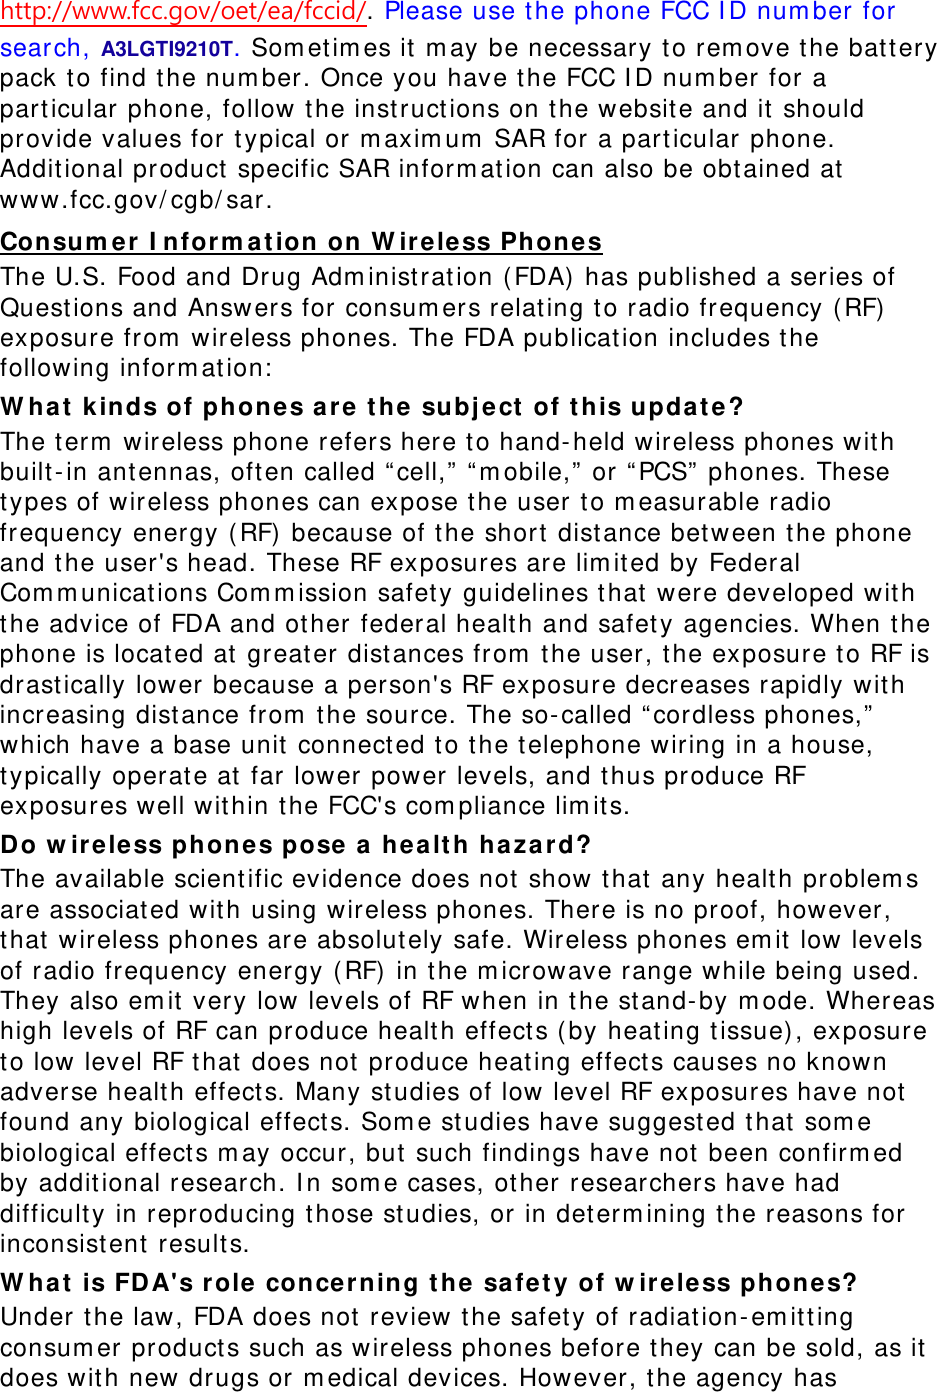 http://www.fcc.gov/oet/ea/fccid/. Please use the phone FCC ID number for search, A3LGTI9210T. Sometimes it may be necessary to remove the battery pack to find the number. Once you have the FCC ID number for a particular phone, follow the instructions on the website and it should provide values for typical or maximum SAR for a particular phone. Additional product specific SAR information can also be obtained at www.fcc.gov/cgb/sar. Consumer Information on Wireless Phones The U.S. Food and Drug Administration (FDA) has published a series of Questions and Answers for consumers relating to radio frequency (RF) exposure from wireless phones. The FDA publication includes the following information: What kinds of phones are the subject of this update? The term wireless phone refers here to hand-held wireless phones with built-in antennas, often called “cell,” “mobile,” or “PCS” phones. These types of wireless phones can expose the user to measurable radio frequency energy (RF) because of the short distance between the phone and the user&apos;s head. These RF exposures are limited by Federal Communications Commission safety guidelines that were developed with the advice of FDA and other federal health and safety agencies. When the phone is located at greater distances from the user, the exposure to RF is drastically lower because a person&apos;s RF exposure decreases rapidly with increasing distance from the source. The so-called “cordless phones,” which have a base unit connected to the telephone wiring in a house, typically operate at far lower power levels, and thus produce RF exposures well within the FCC&apos;s compliance limits. Do wireless phones pose a health hazard? The available scientific evidence does not show that any health problems are associated with using wireless phones. There is no proof, however, that wireless phones are absolutely safe. Wireless phones emit low levels of radio frequency energy (RF) in the microwave range while being used. They also emit very low levels of RF when in the stand-by mode. Whereas high levels of RF can produce health effects (by heating tissue), exposure to low level RF that does not produce heating effects causes no known adverse health effects. Many studies of low level RF exposures have not found any biological effects. Some studies have suggested that some biological effects may occur, but such findings have not been confirmed by additional research. In some cases, other researchers have had difficulty in reproducing those studies, or in determining the reasons for inconsistent results. What is FDA&apos;s role concerning the safety of wireless phones? Under the law, FDA does not review the safety of radiation-emitting consumer products such as wireless phones before they can be sold, as it does with new drugs or medical devices. However, the agency has 